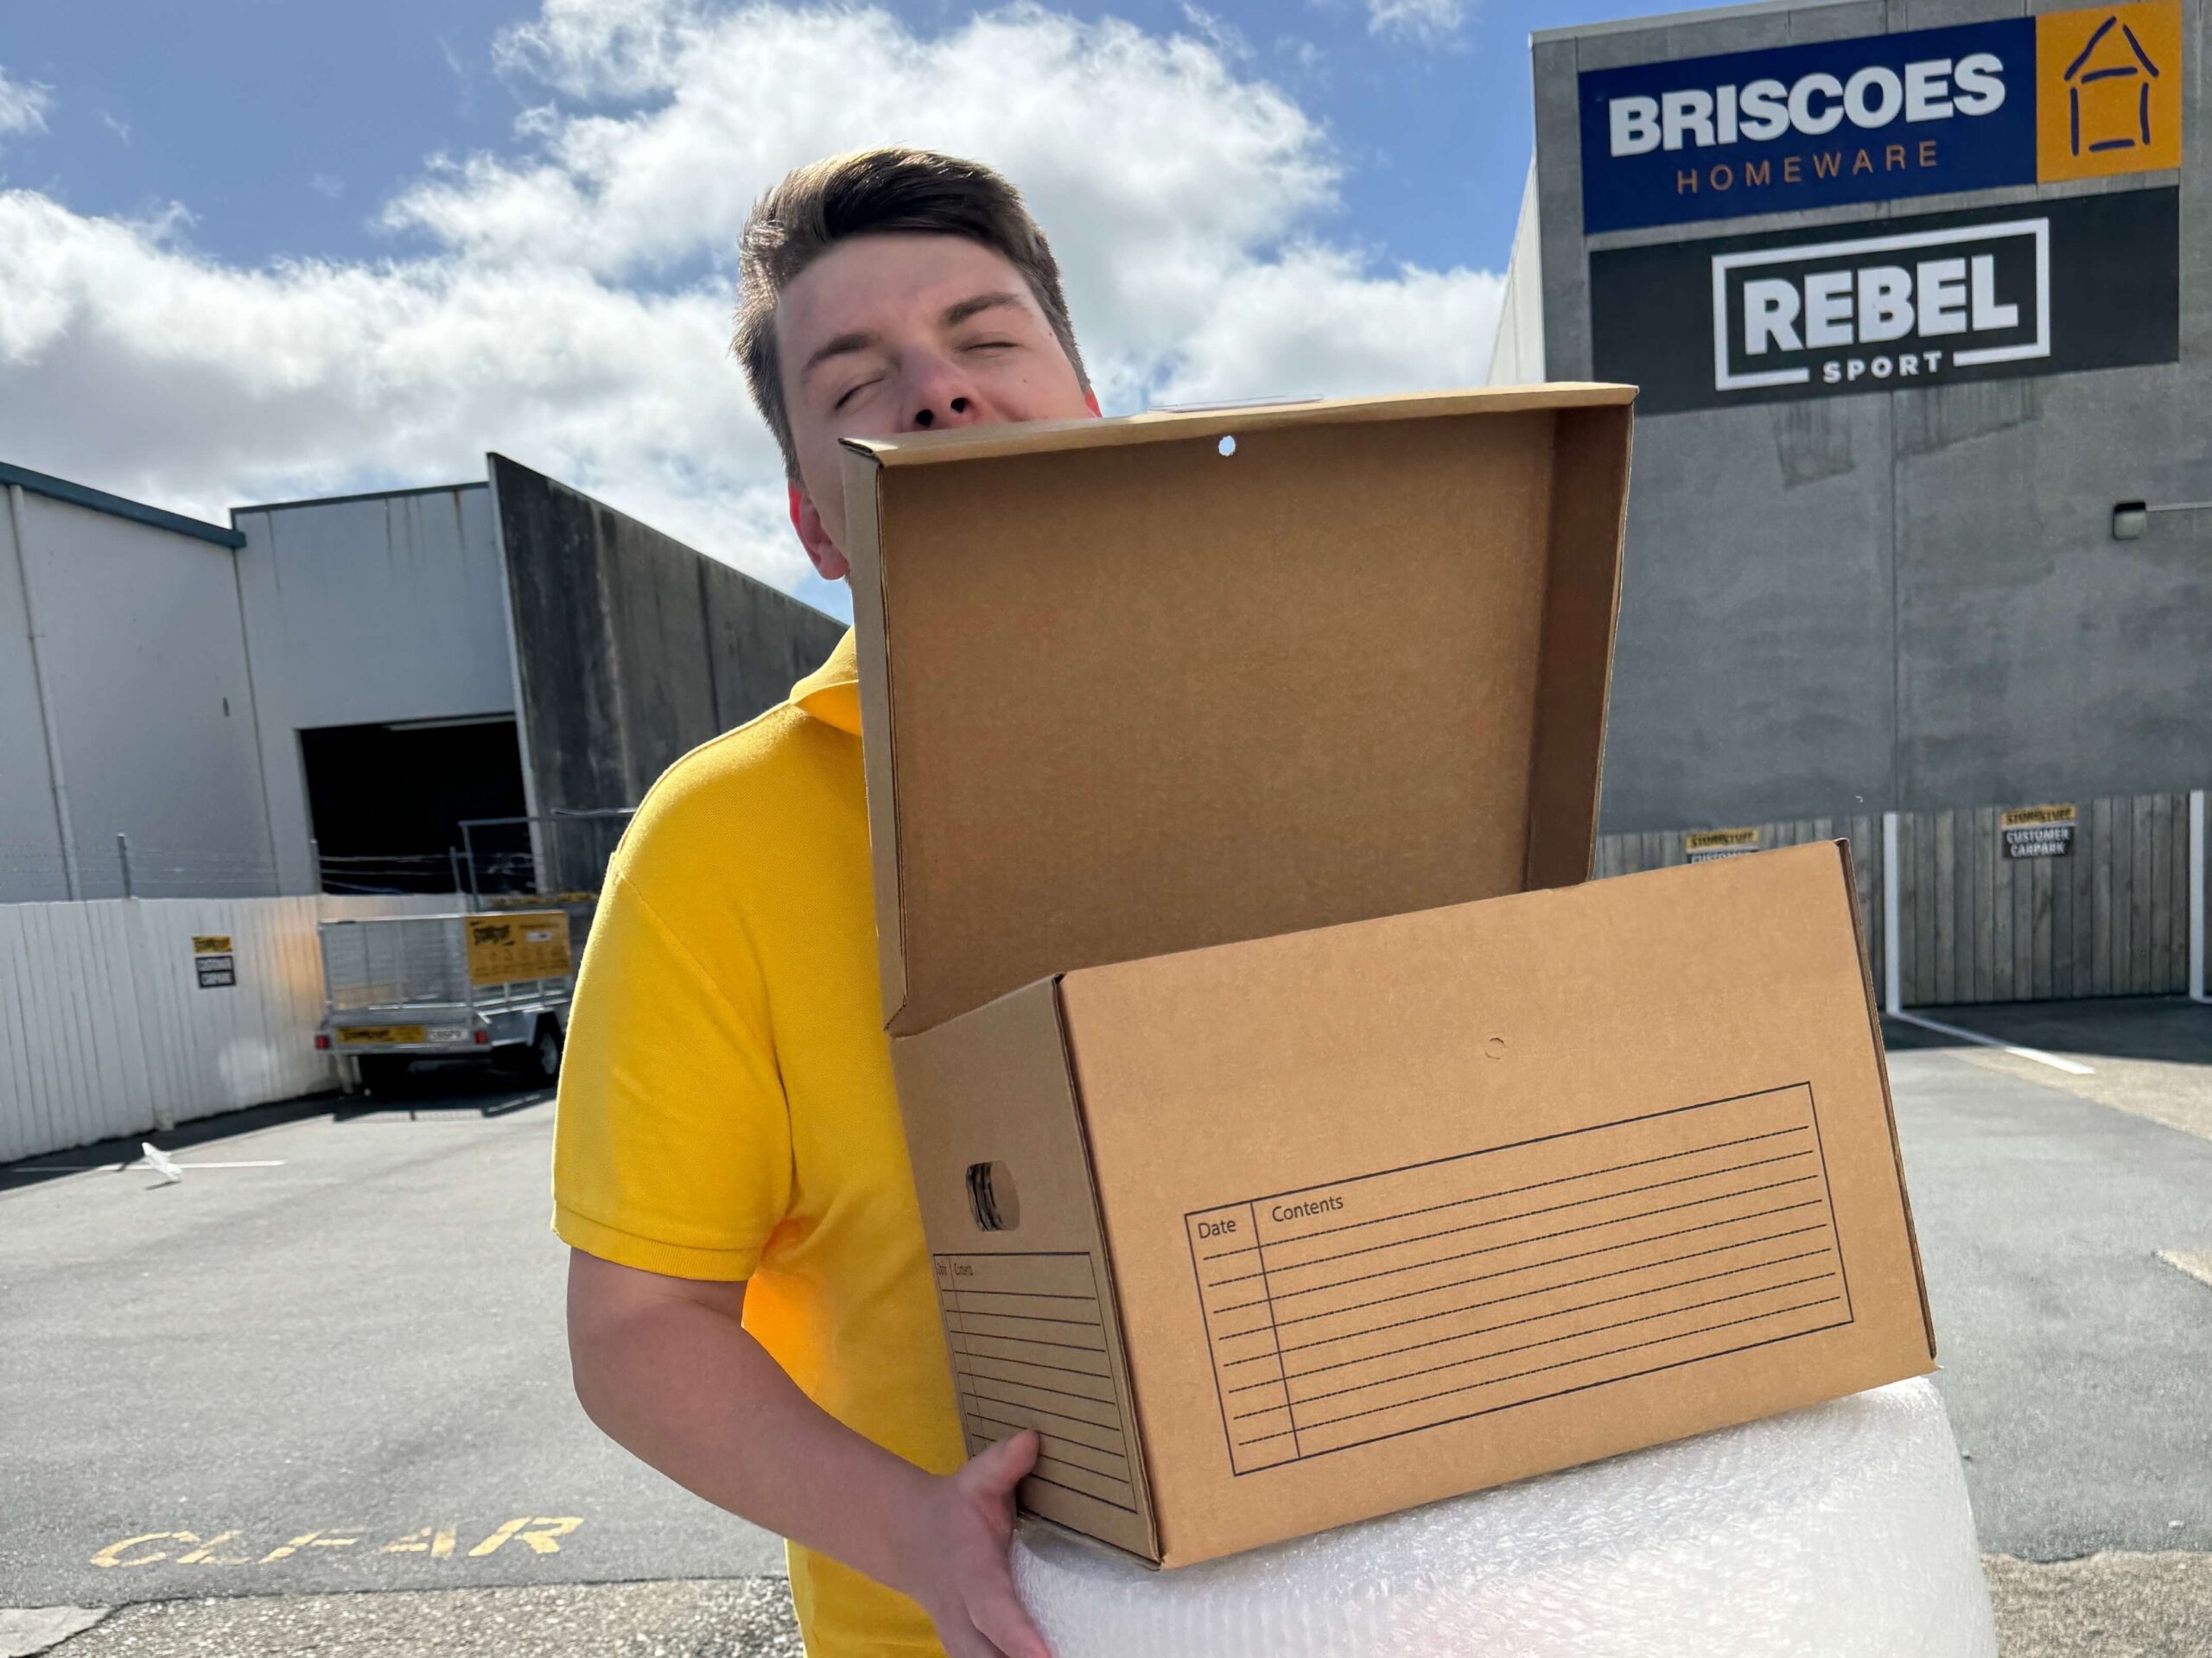 Stacks of cardboard boxes available in Lower Hutt for moving and storage, depicting the additional supplies on offer.